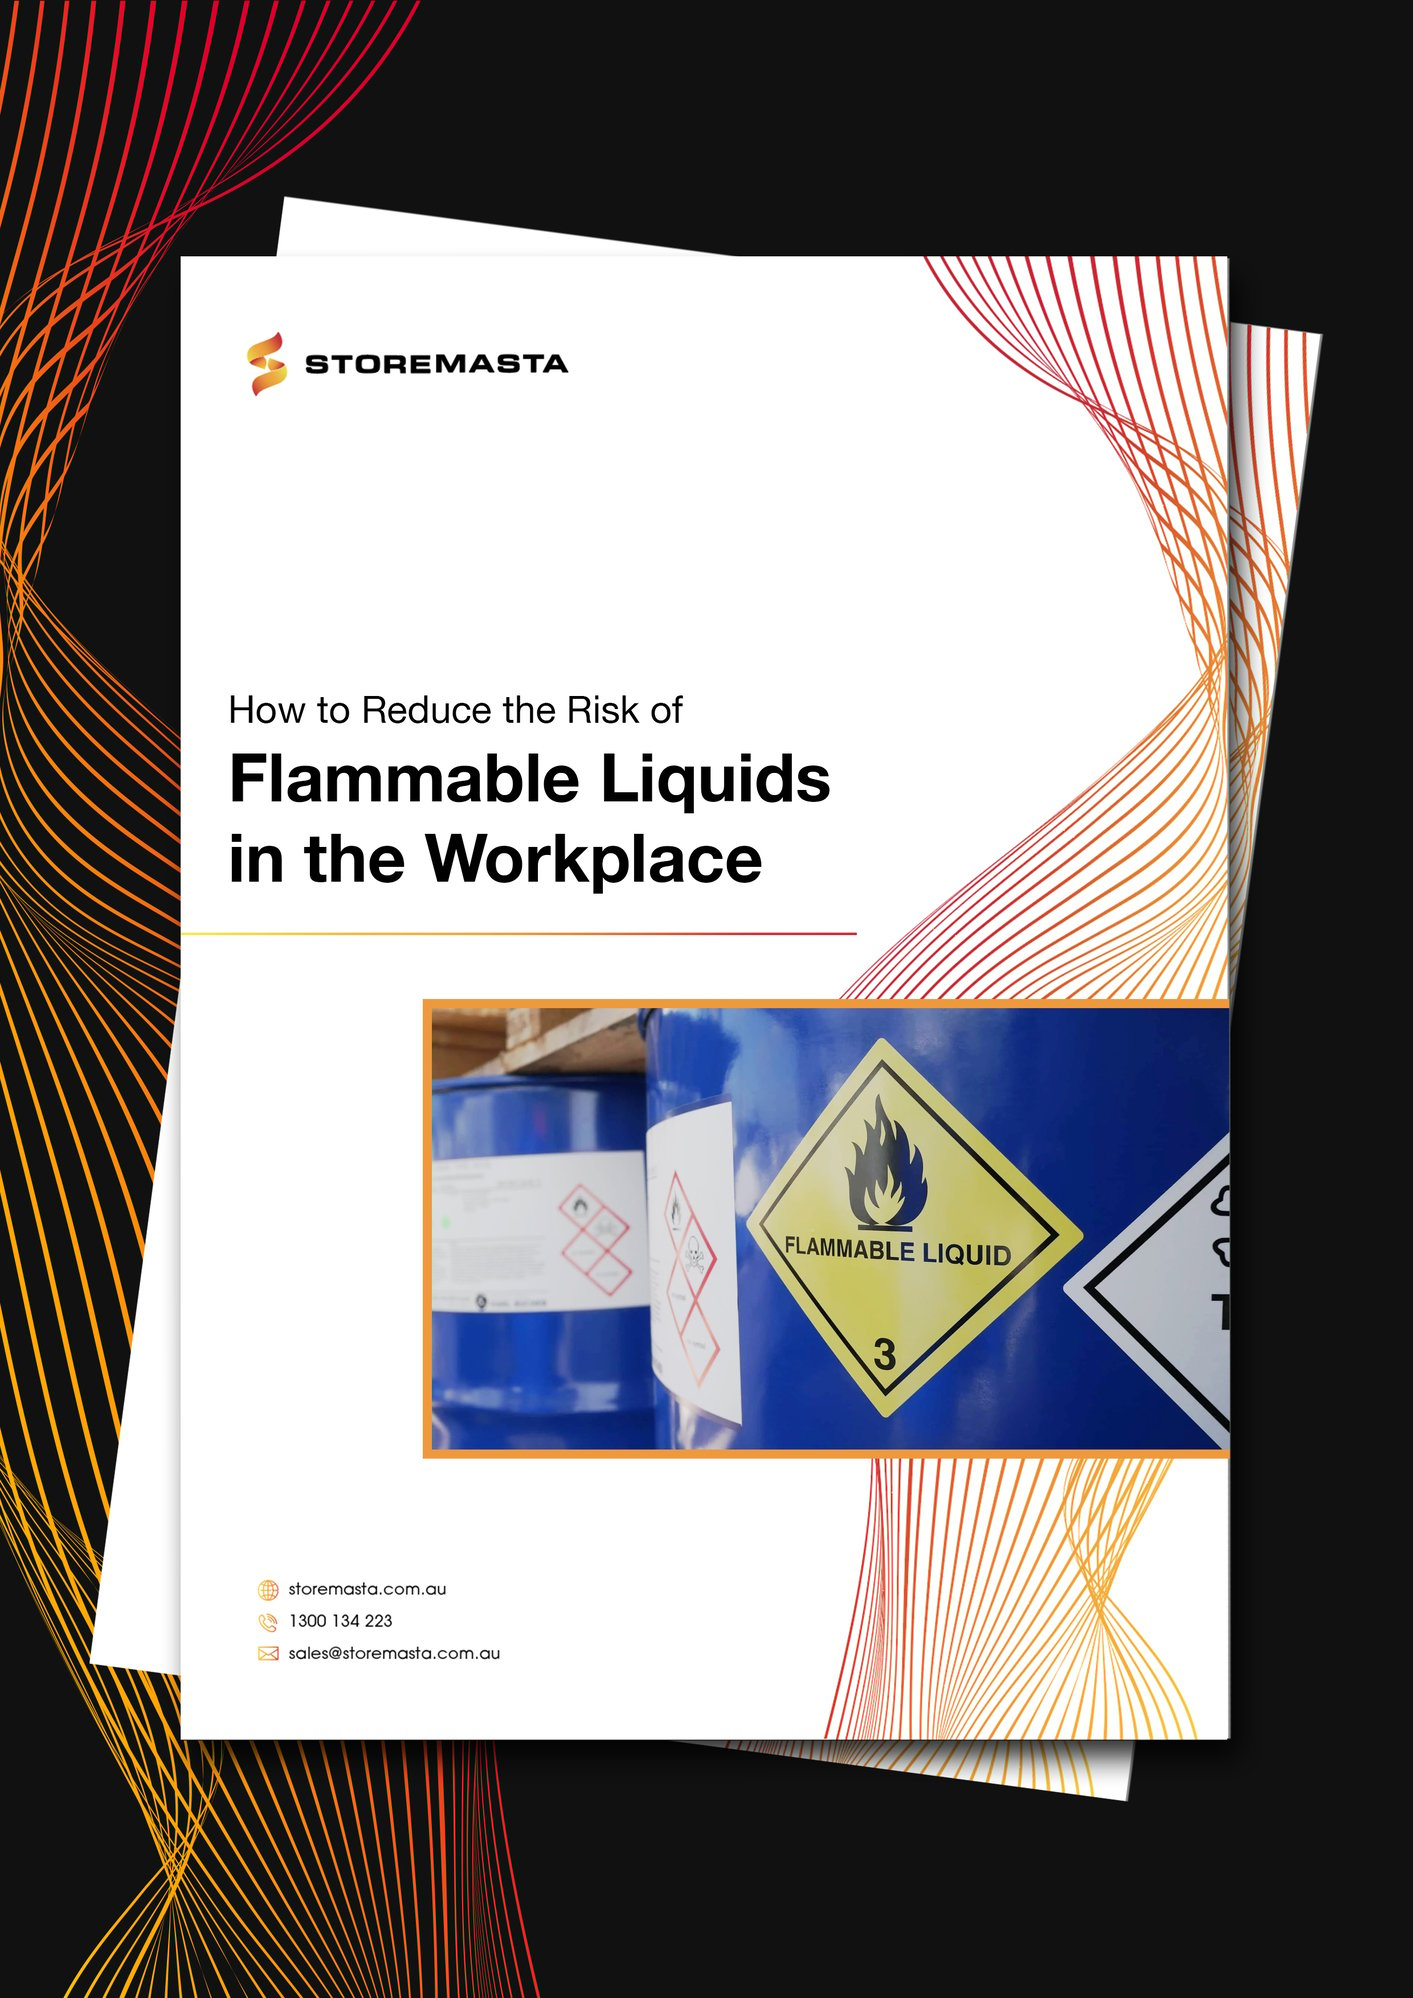 Flammable liquids in workplace